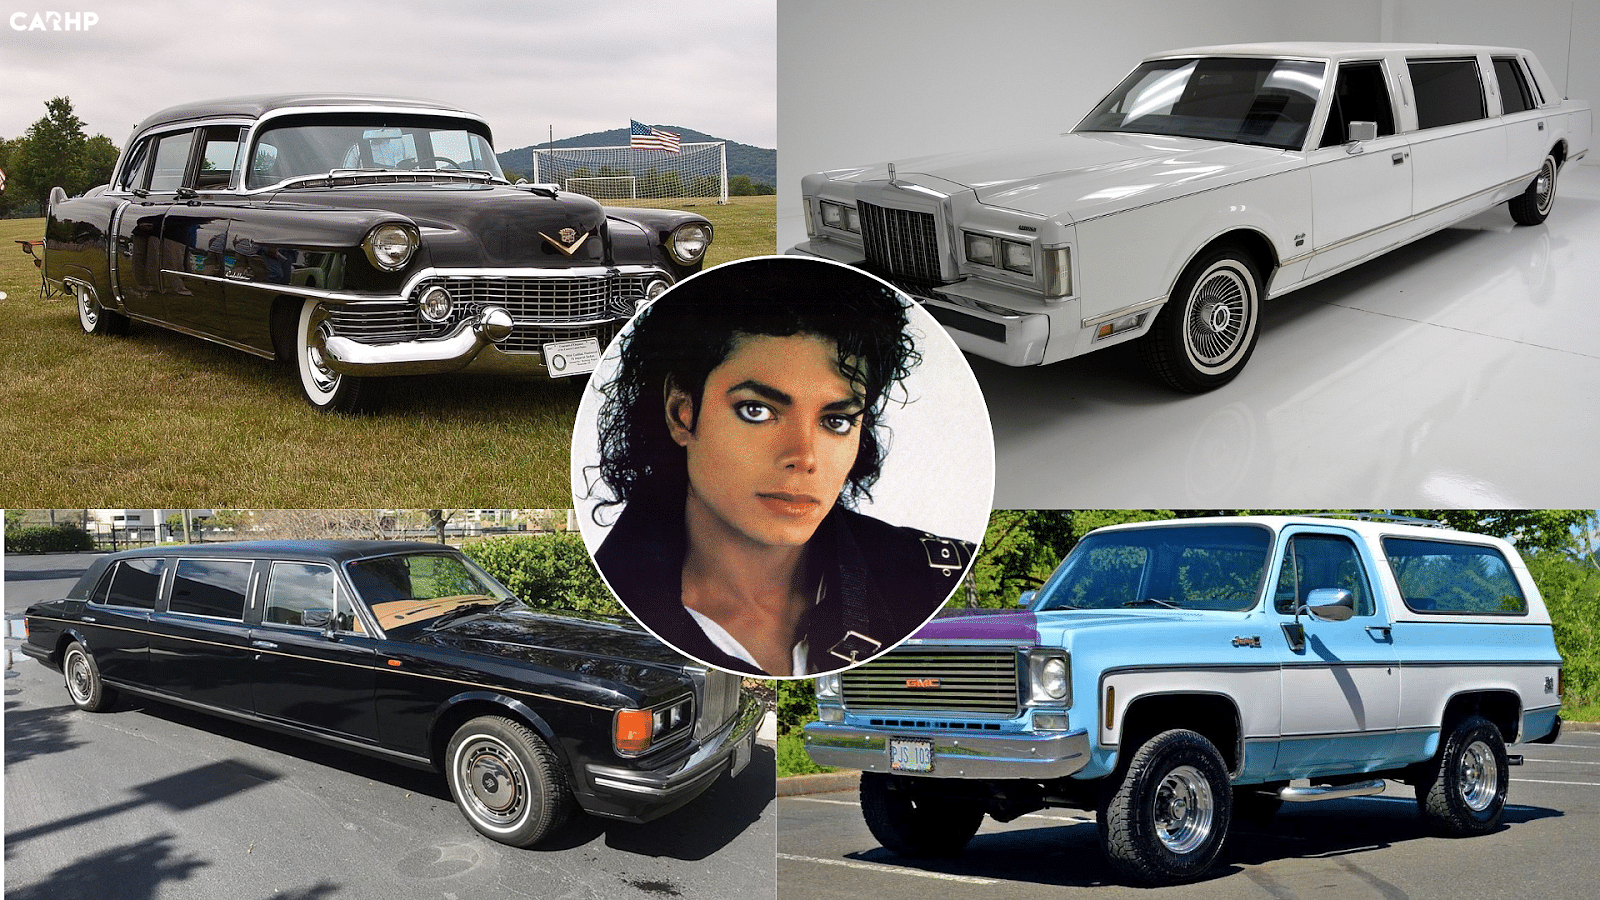 The "King of Pop” Michael Jackson's Car Collection